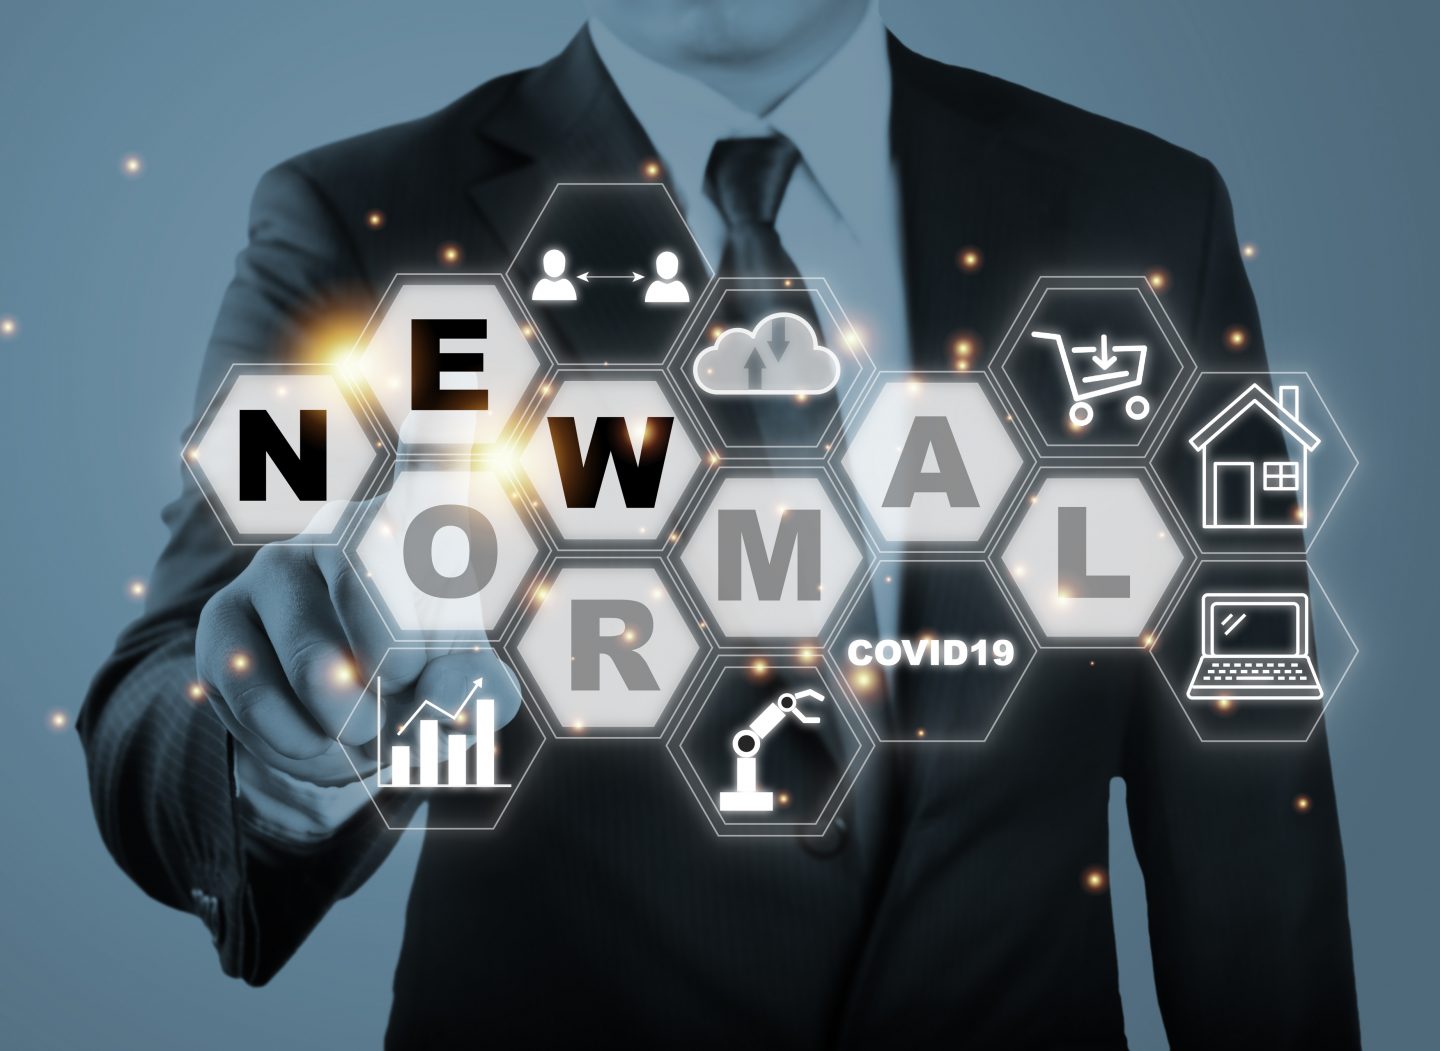 Healthware launches global resource hub for COVID-19’s ‘new normal’